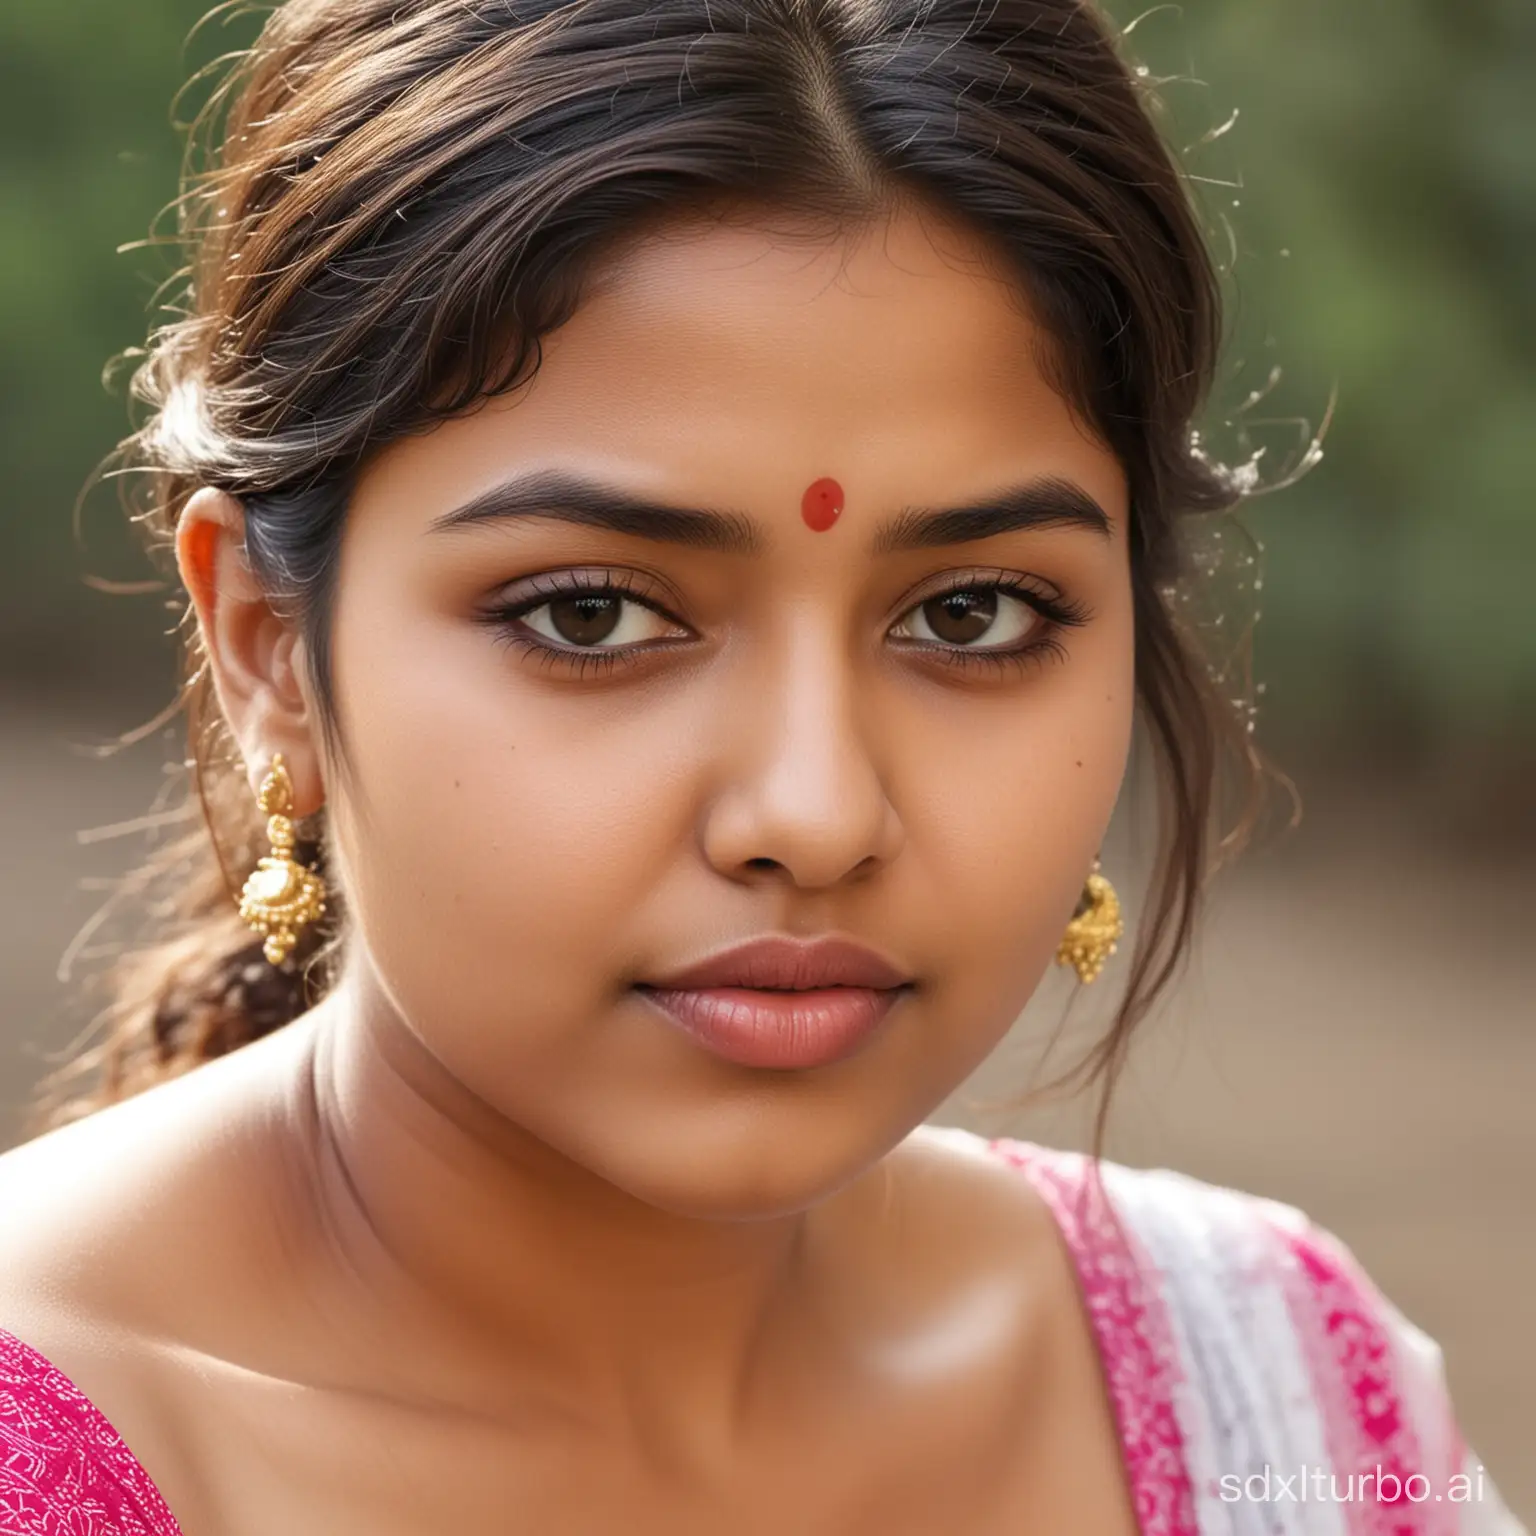 Portrait-of-a-Charming-26YearOld-Maharashtrian-Woman-with-Radiant-Complexion-and-Expressive-Features